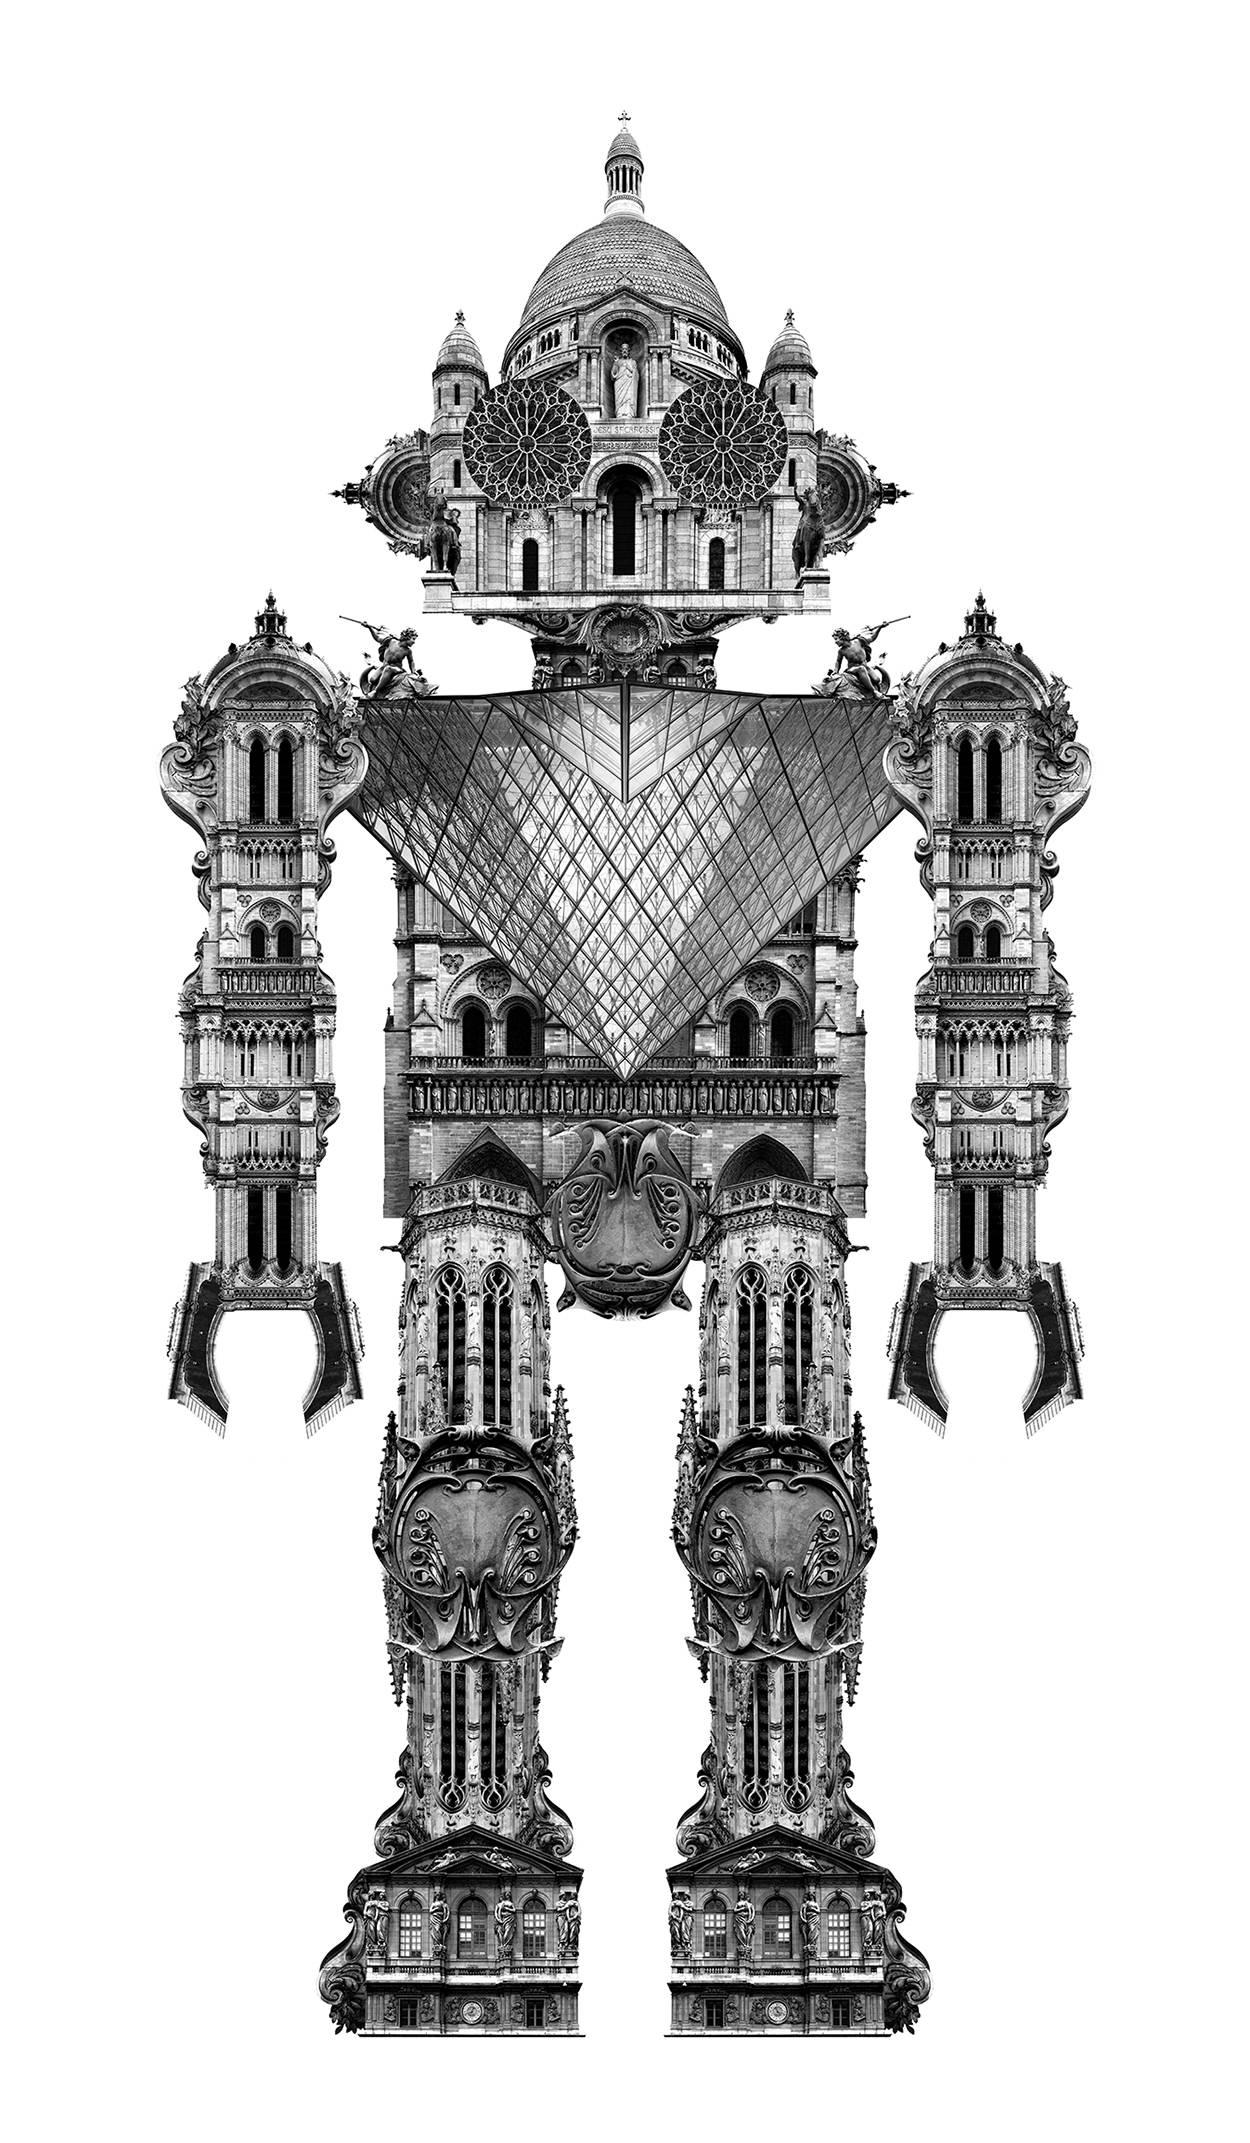 Joel Kuntz Black and White Photograph - Robot made with iconic buildings of Pais, French architectural robot